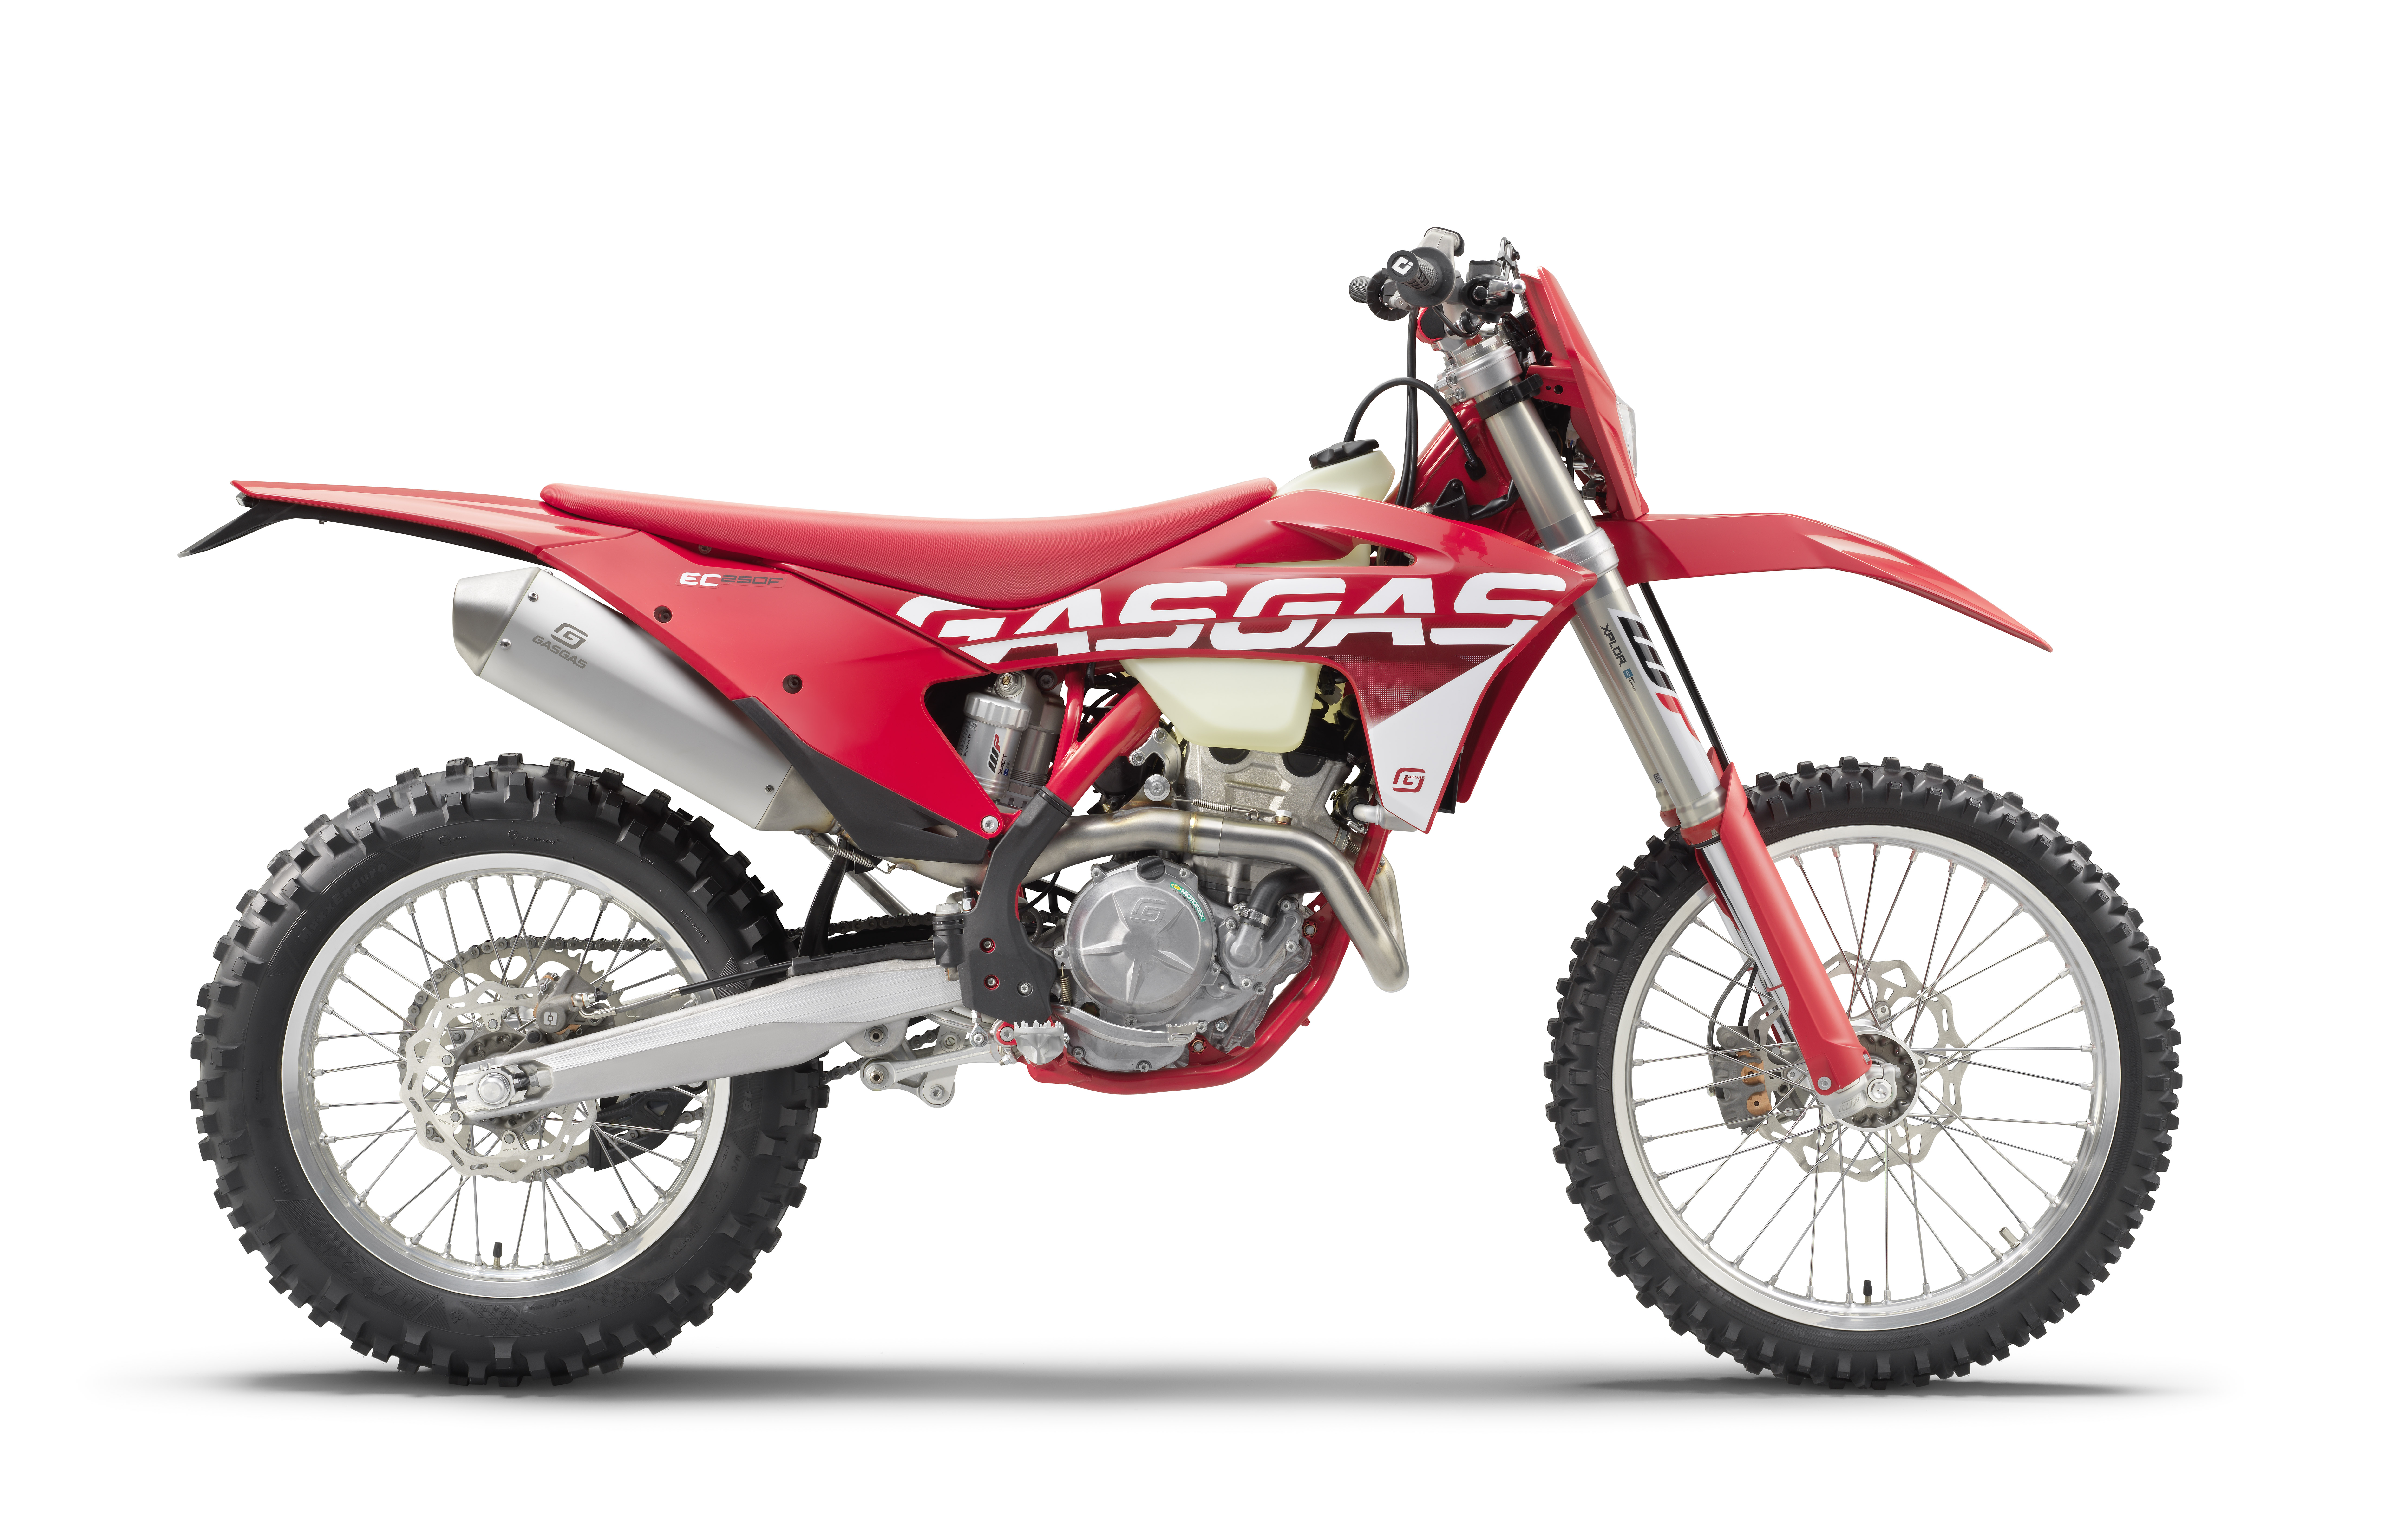 GasGas motorcycles now in Malaysia, enduro and motocross, range from RM39,500 to RM48,000 1493384